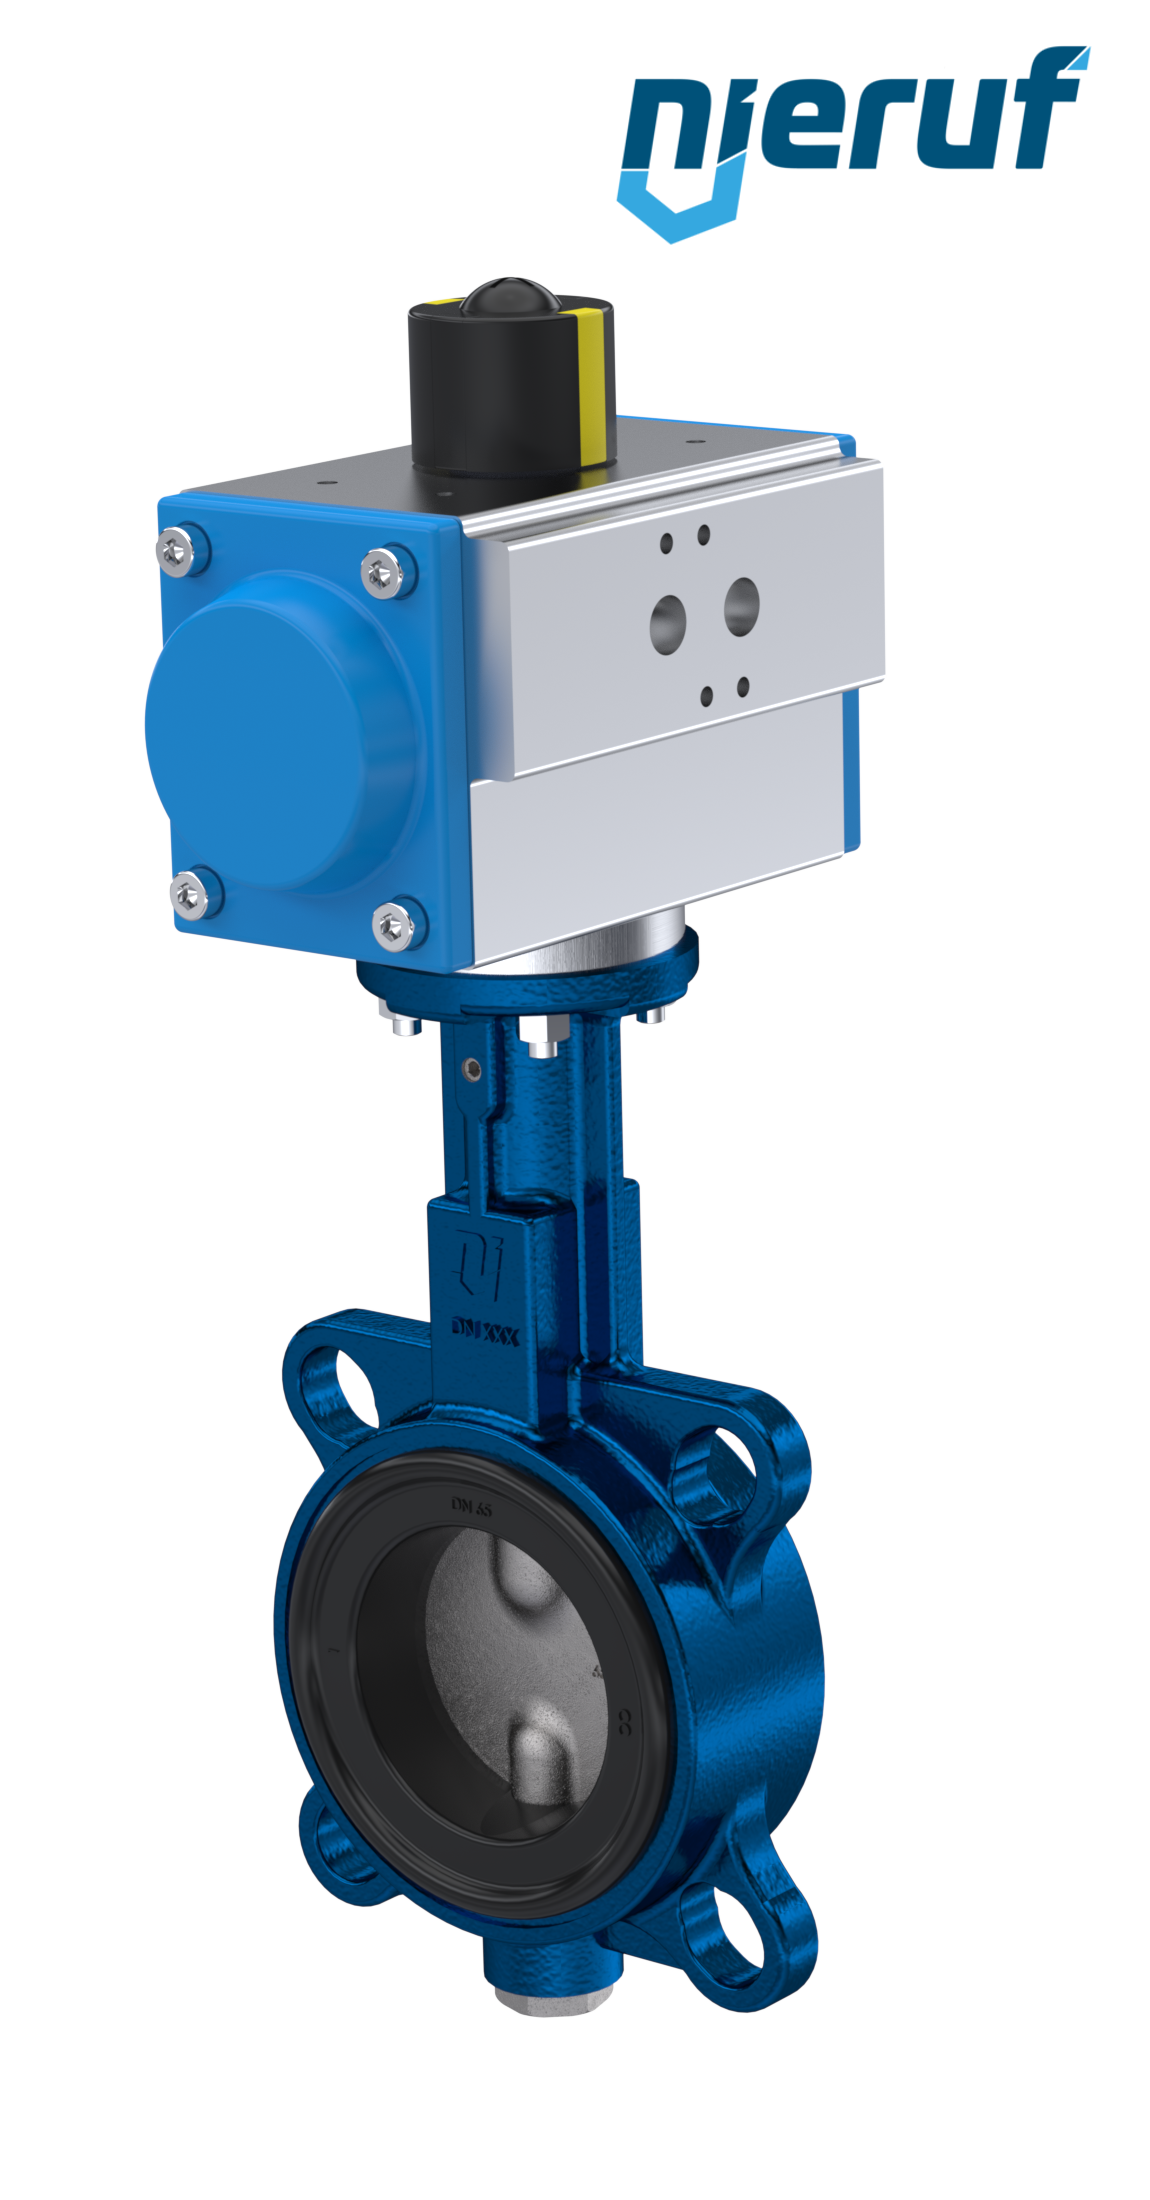 Butterfly valve DN 40 AK01 EPDM DVGW drinking water, WRAS, ACS, W270 pneumatic actuator double acting